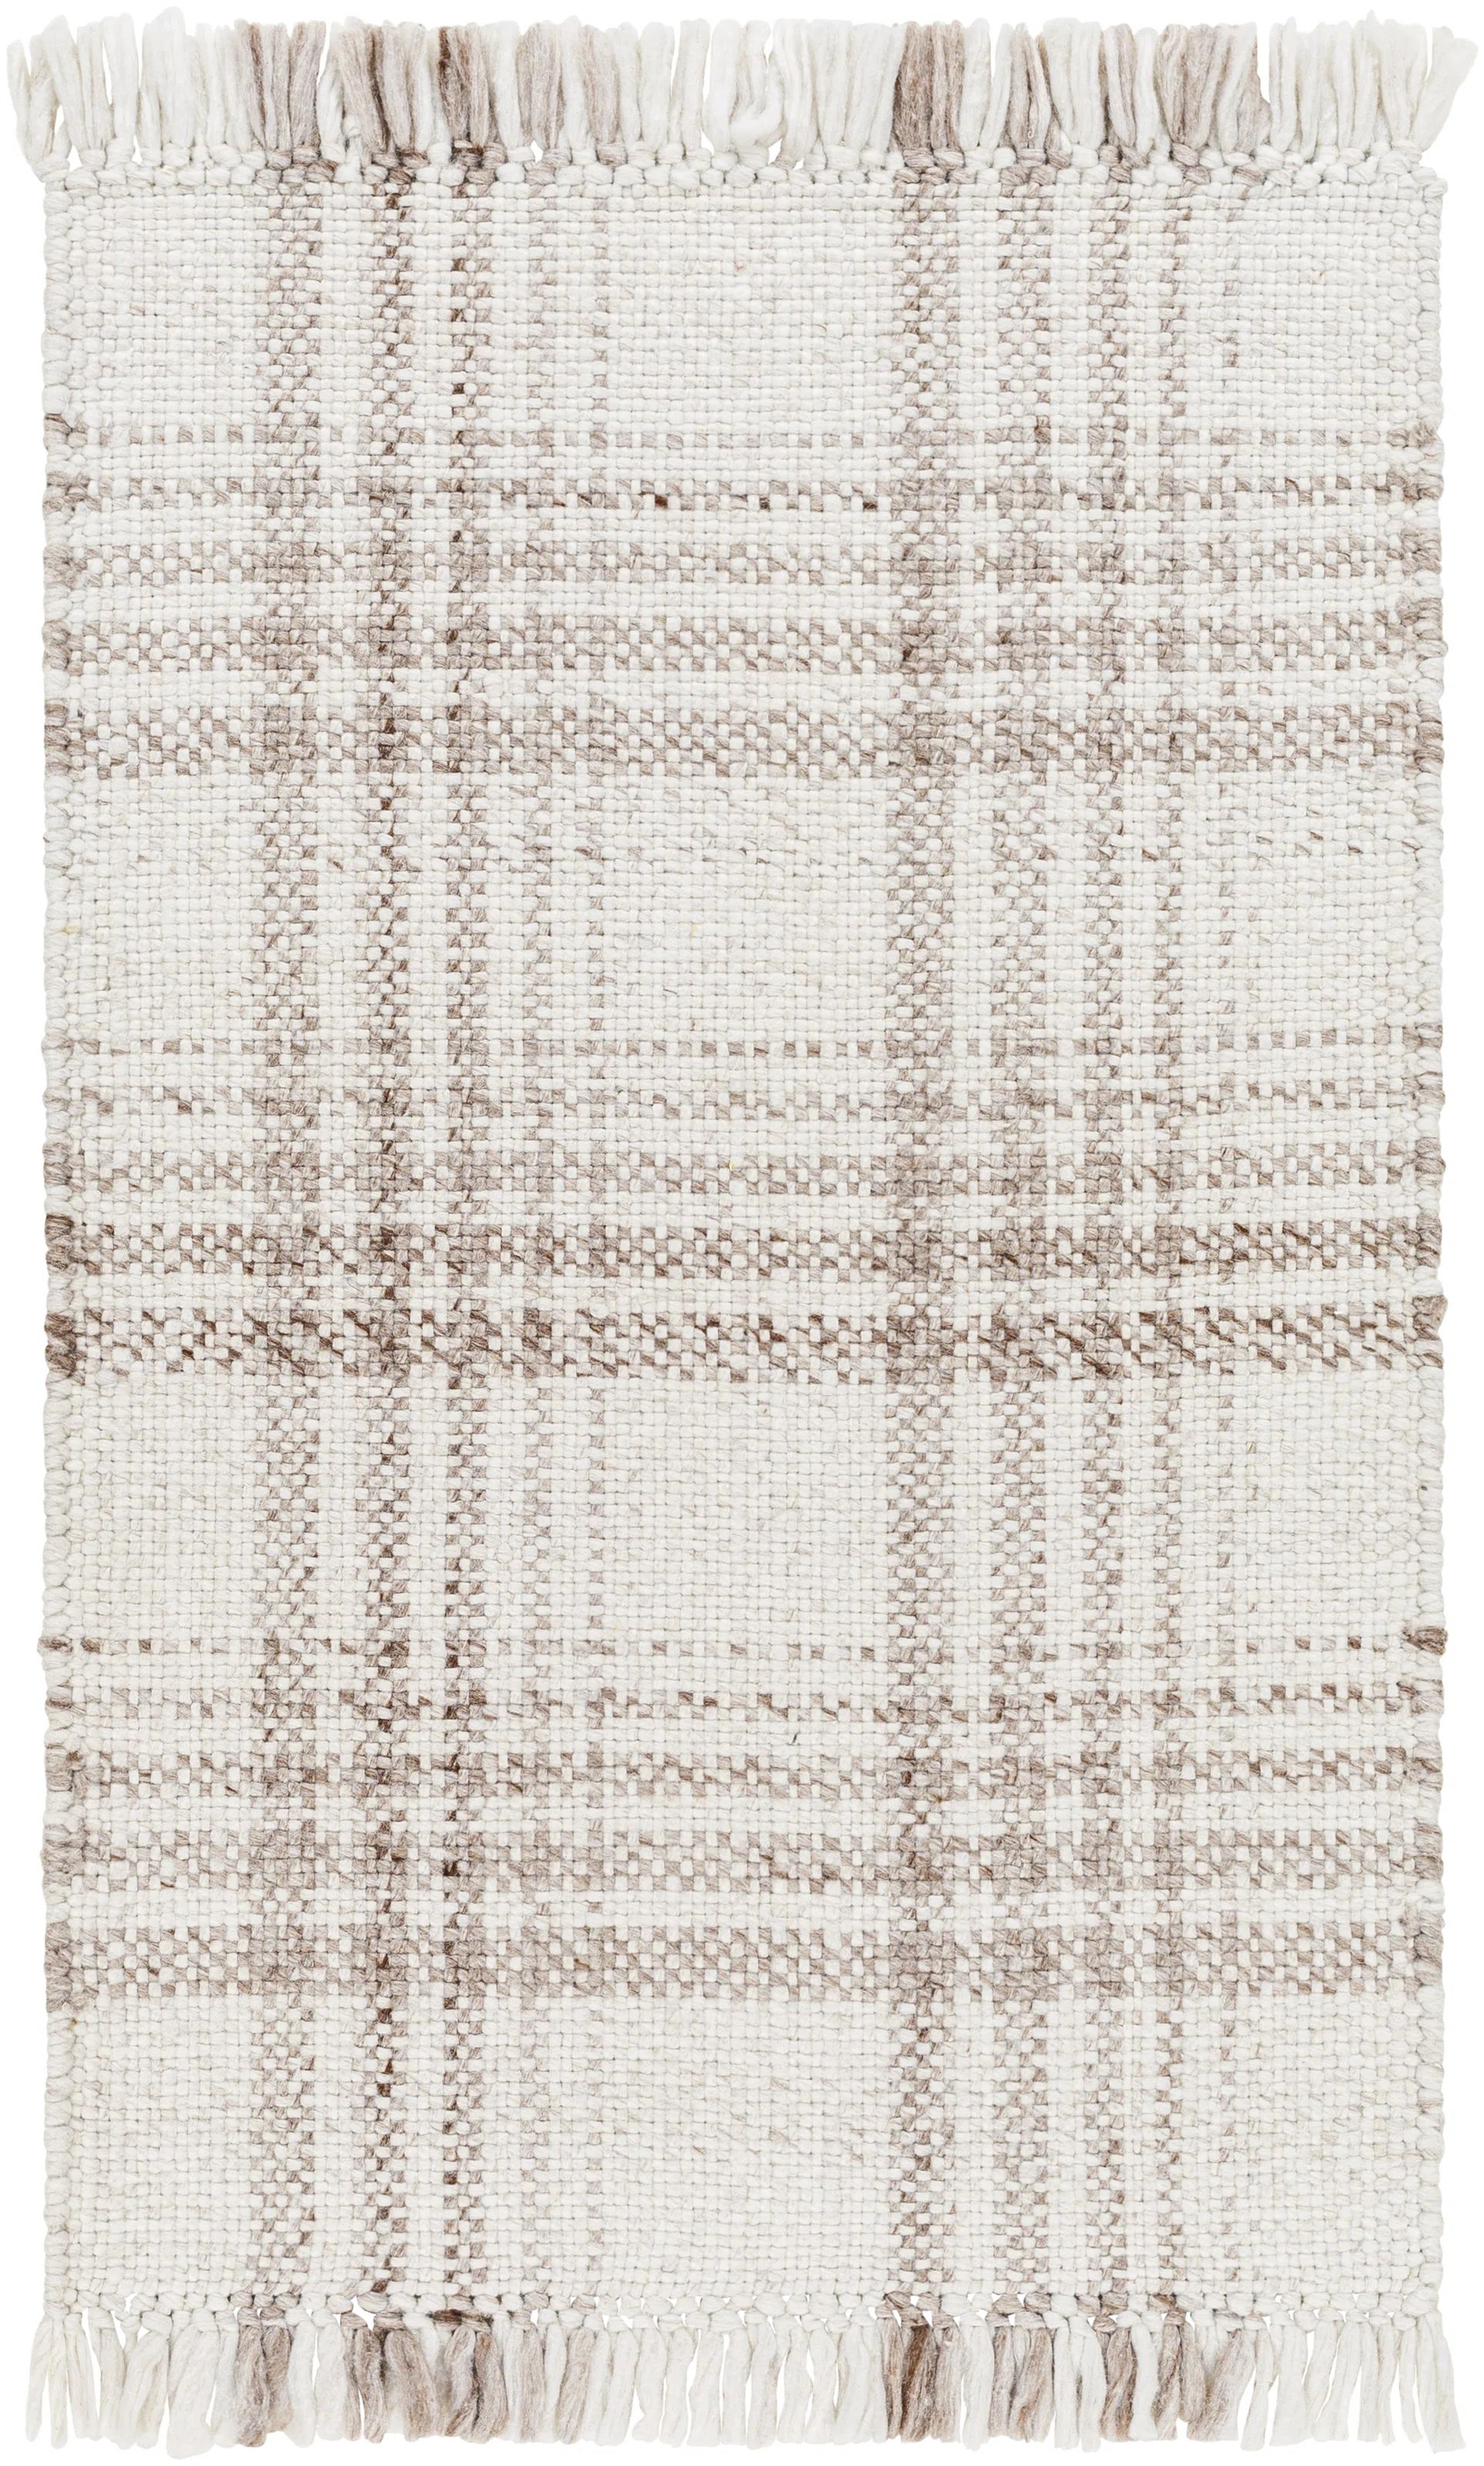 Cay Plaid Flatweave Recycled P.E.T. Indoor/Outdoor Area Rug in Taupe/Beige | Wayfair North America